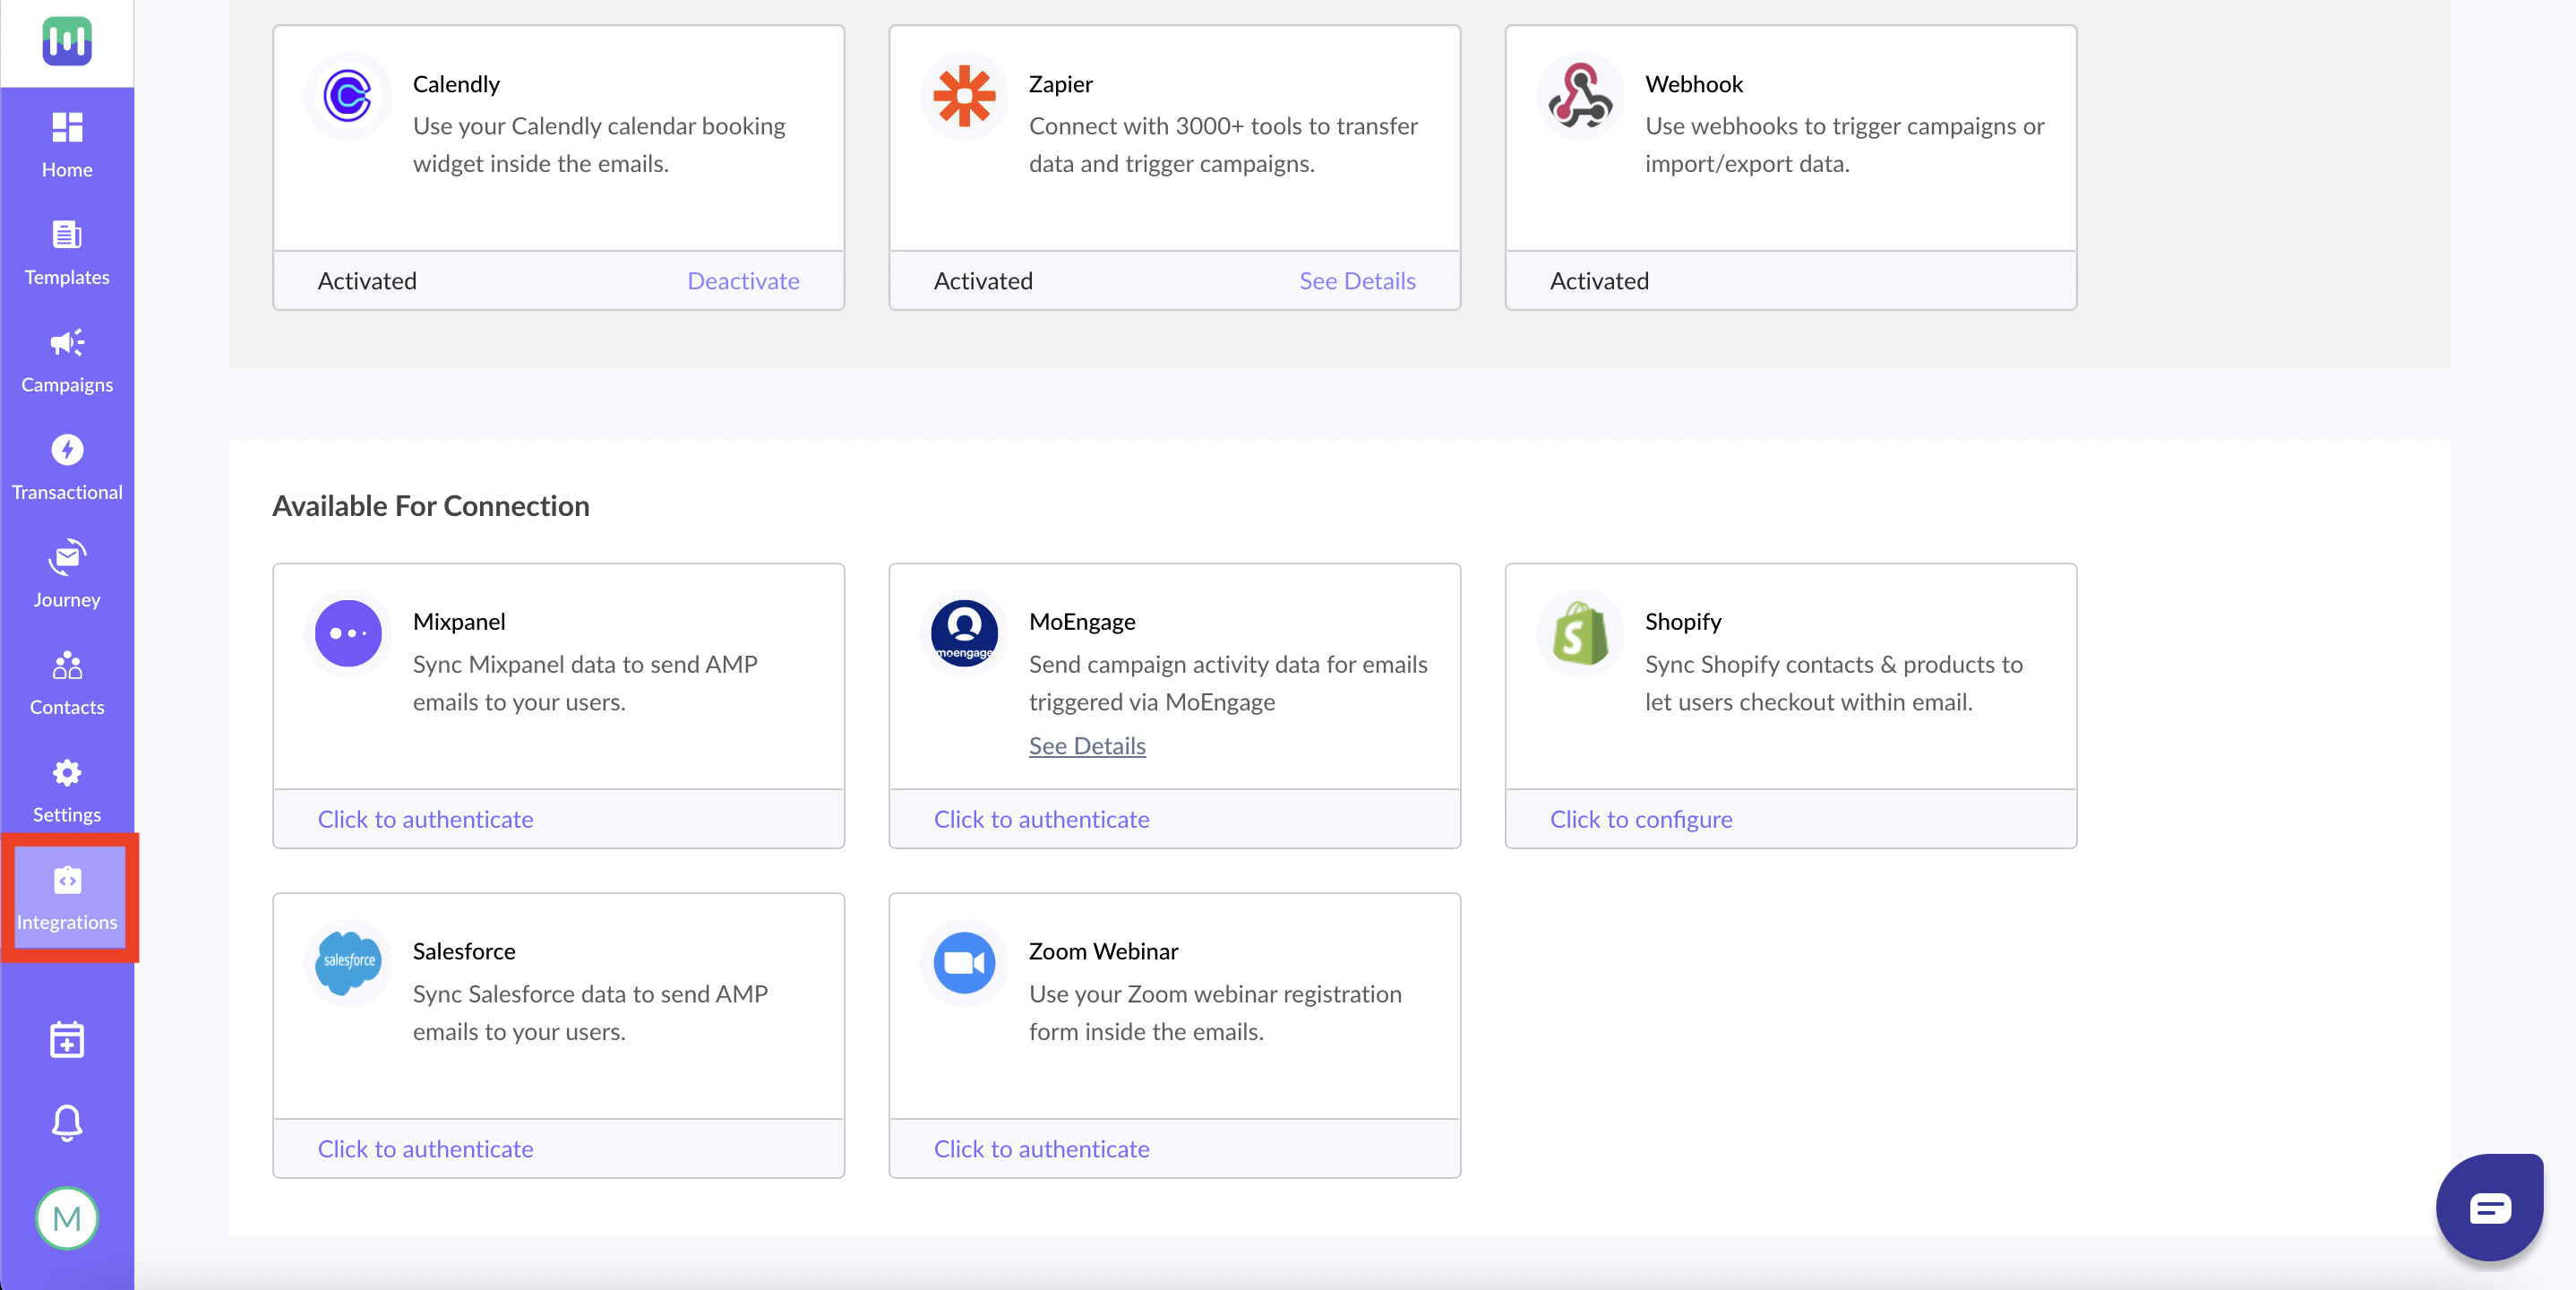 Getting started with MoEngage integration